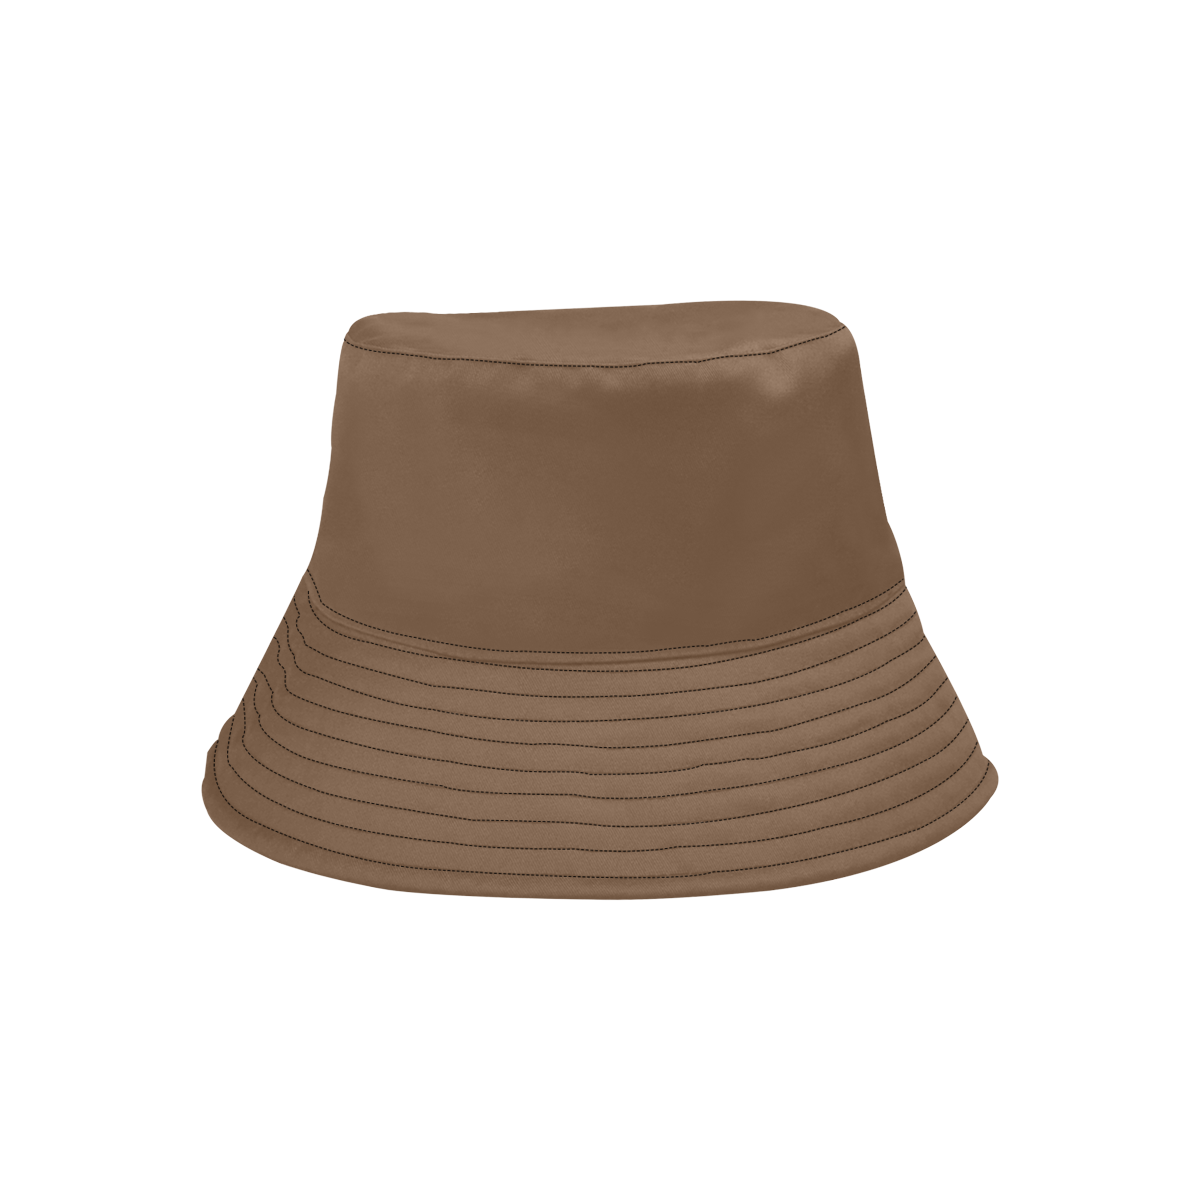 Delicious Dark Chocolate Solid Colored All Over Print Bucket Hat